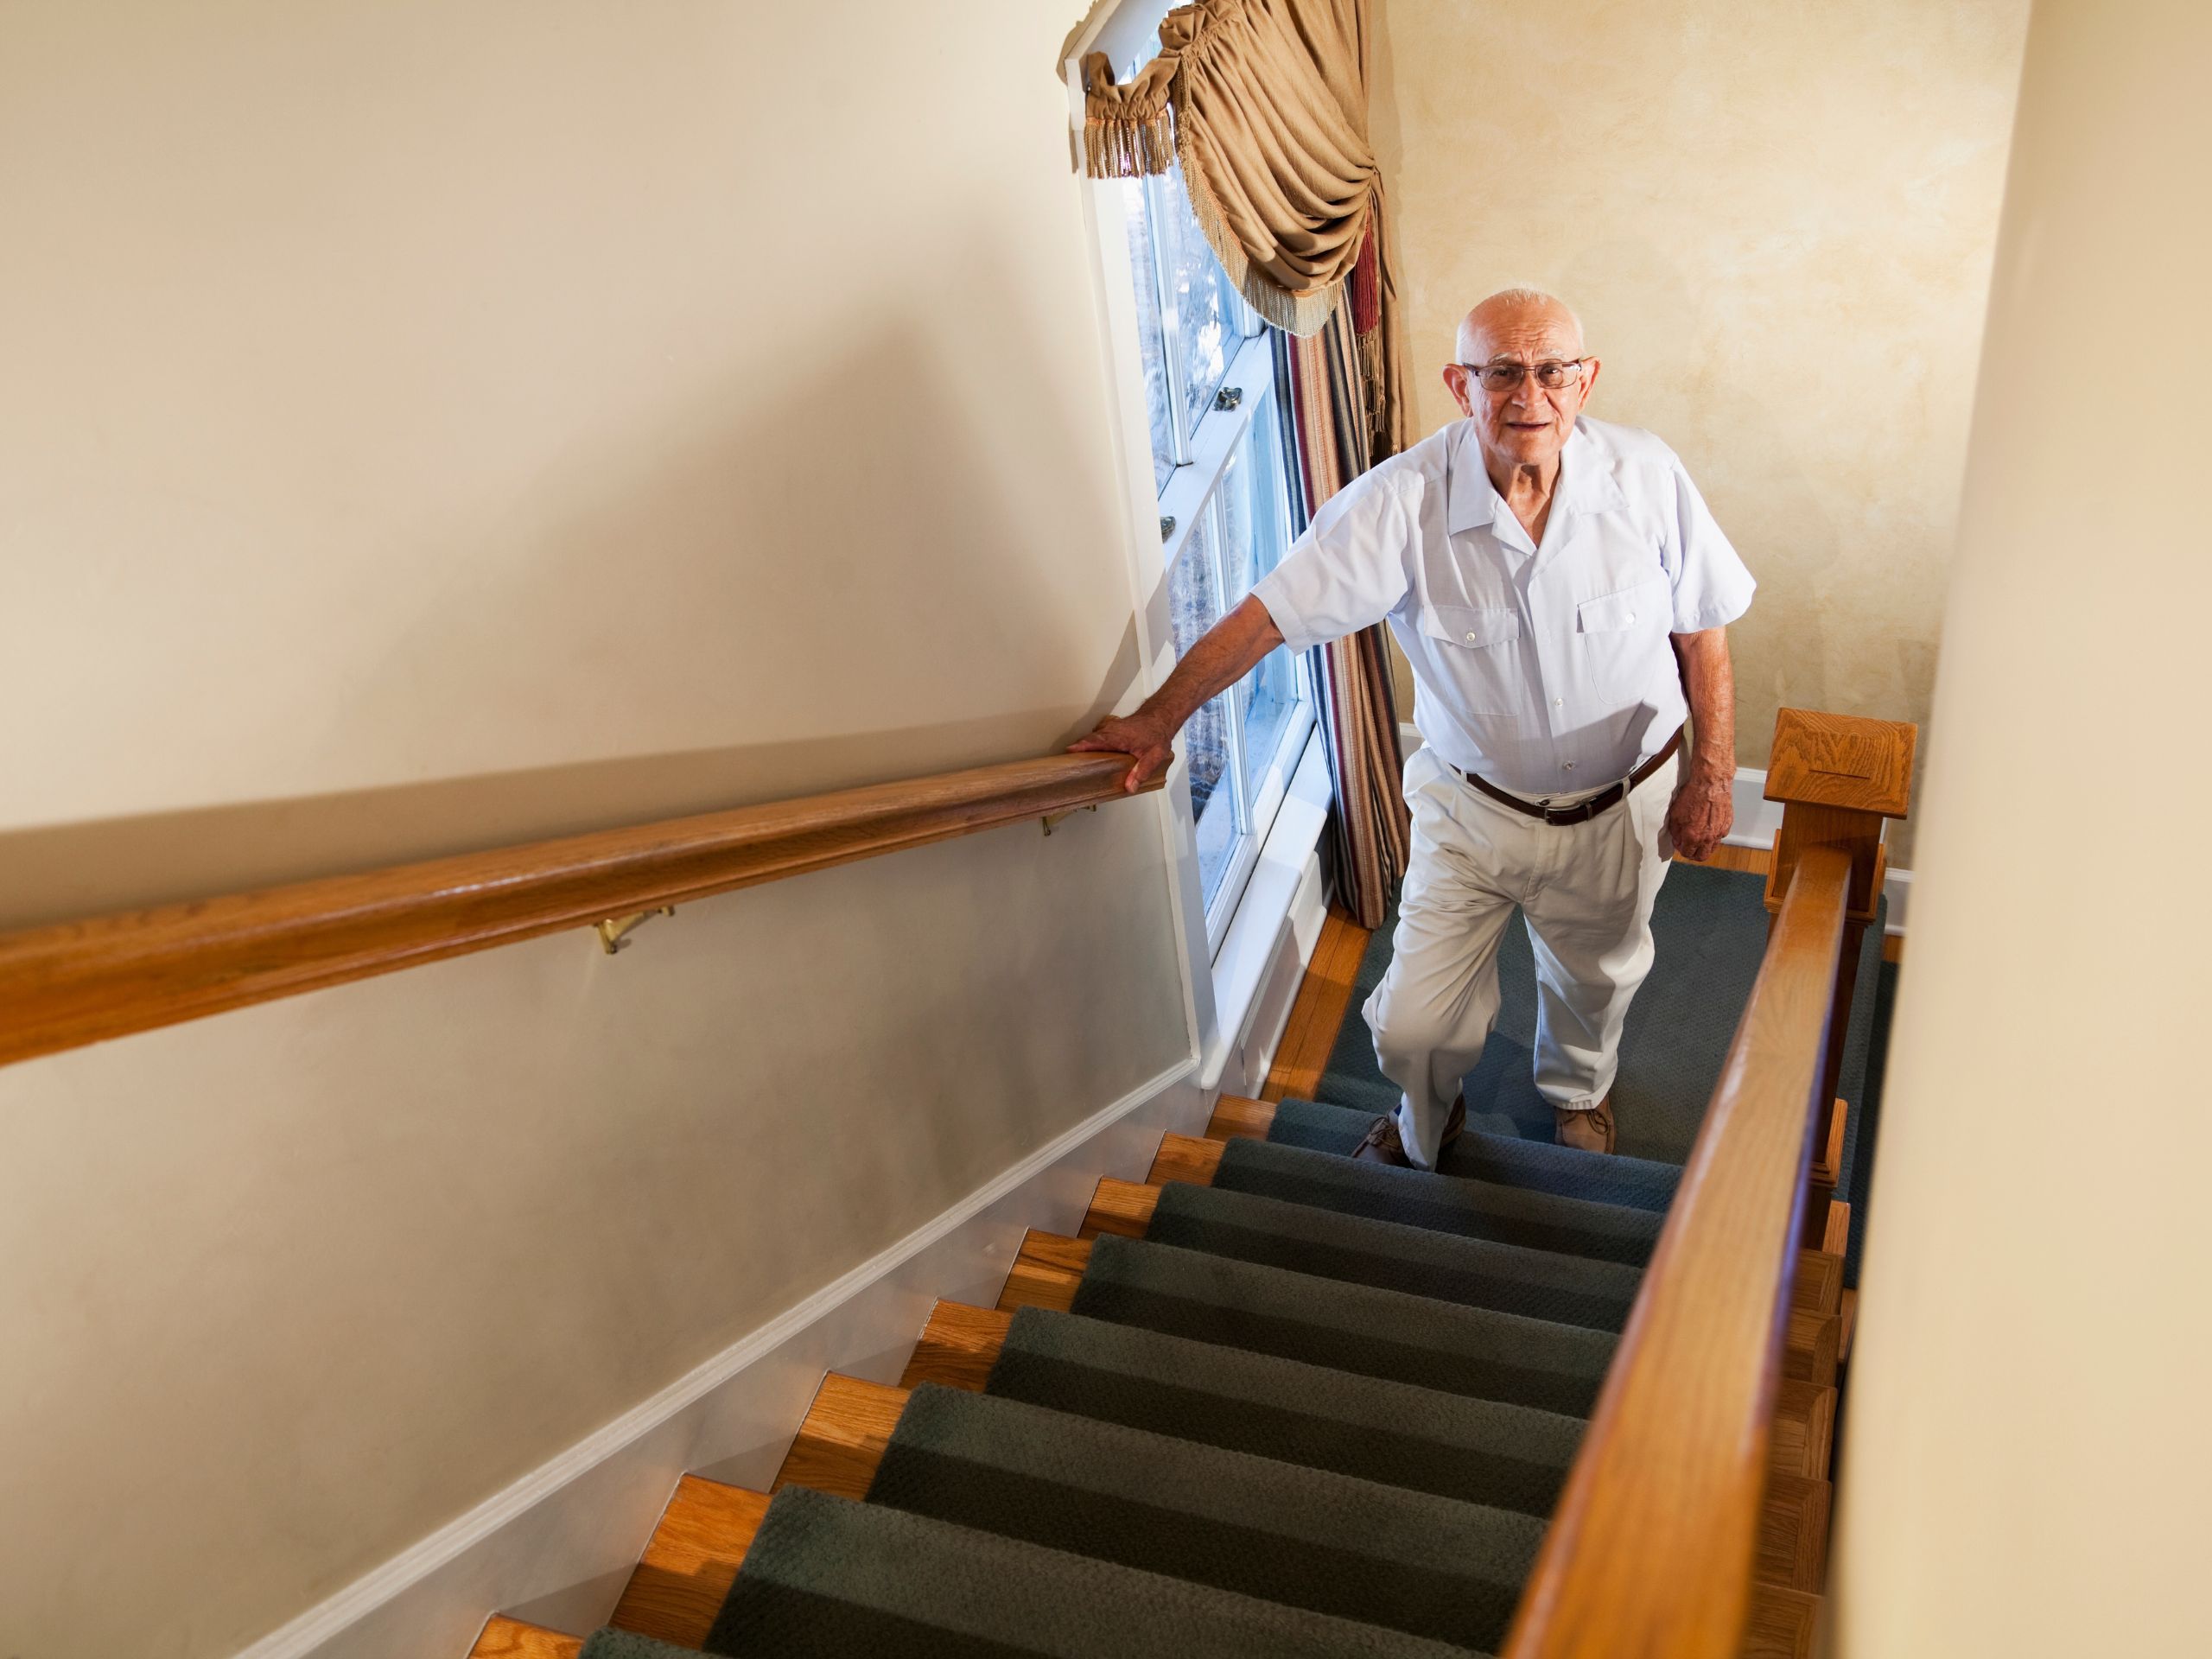 Elderly man at the bottom of a set of stairs looking to walk up holding onto handrail